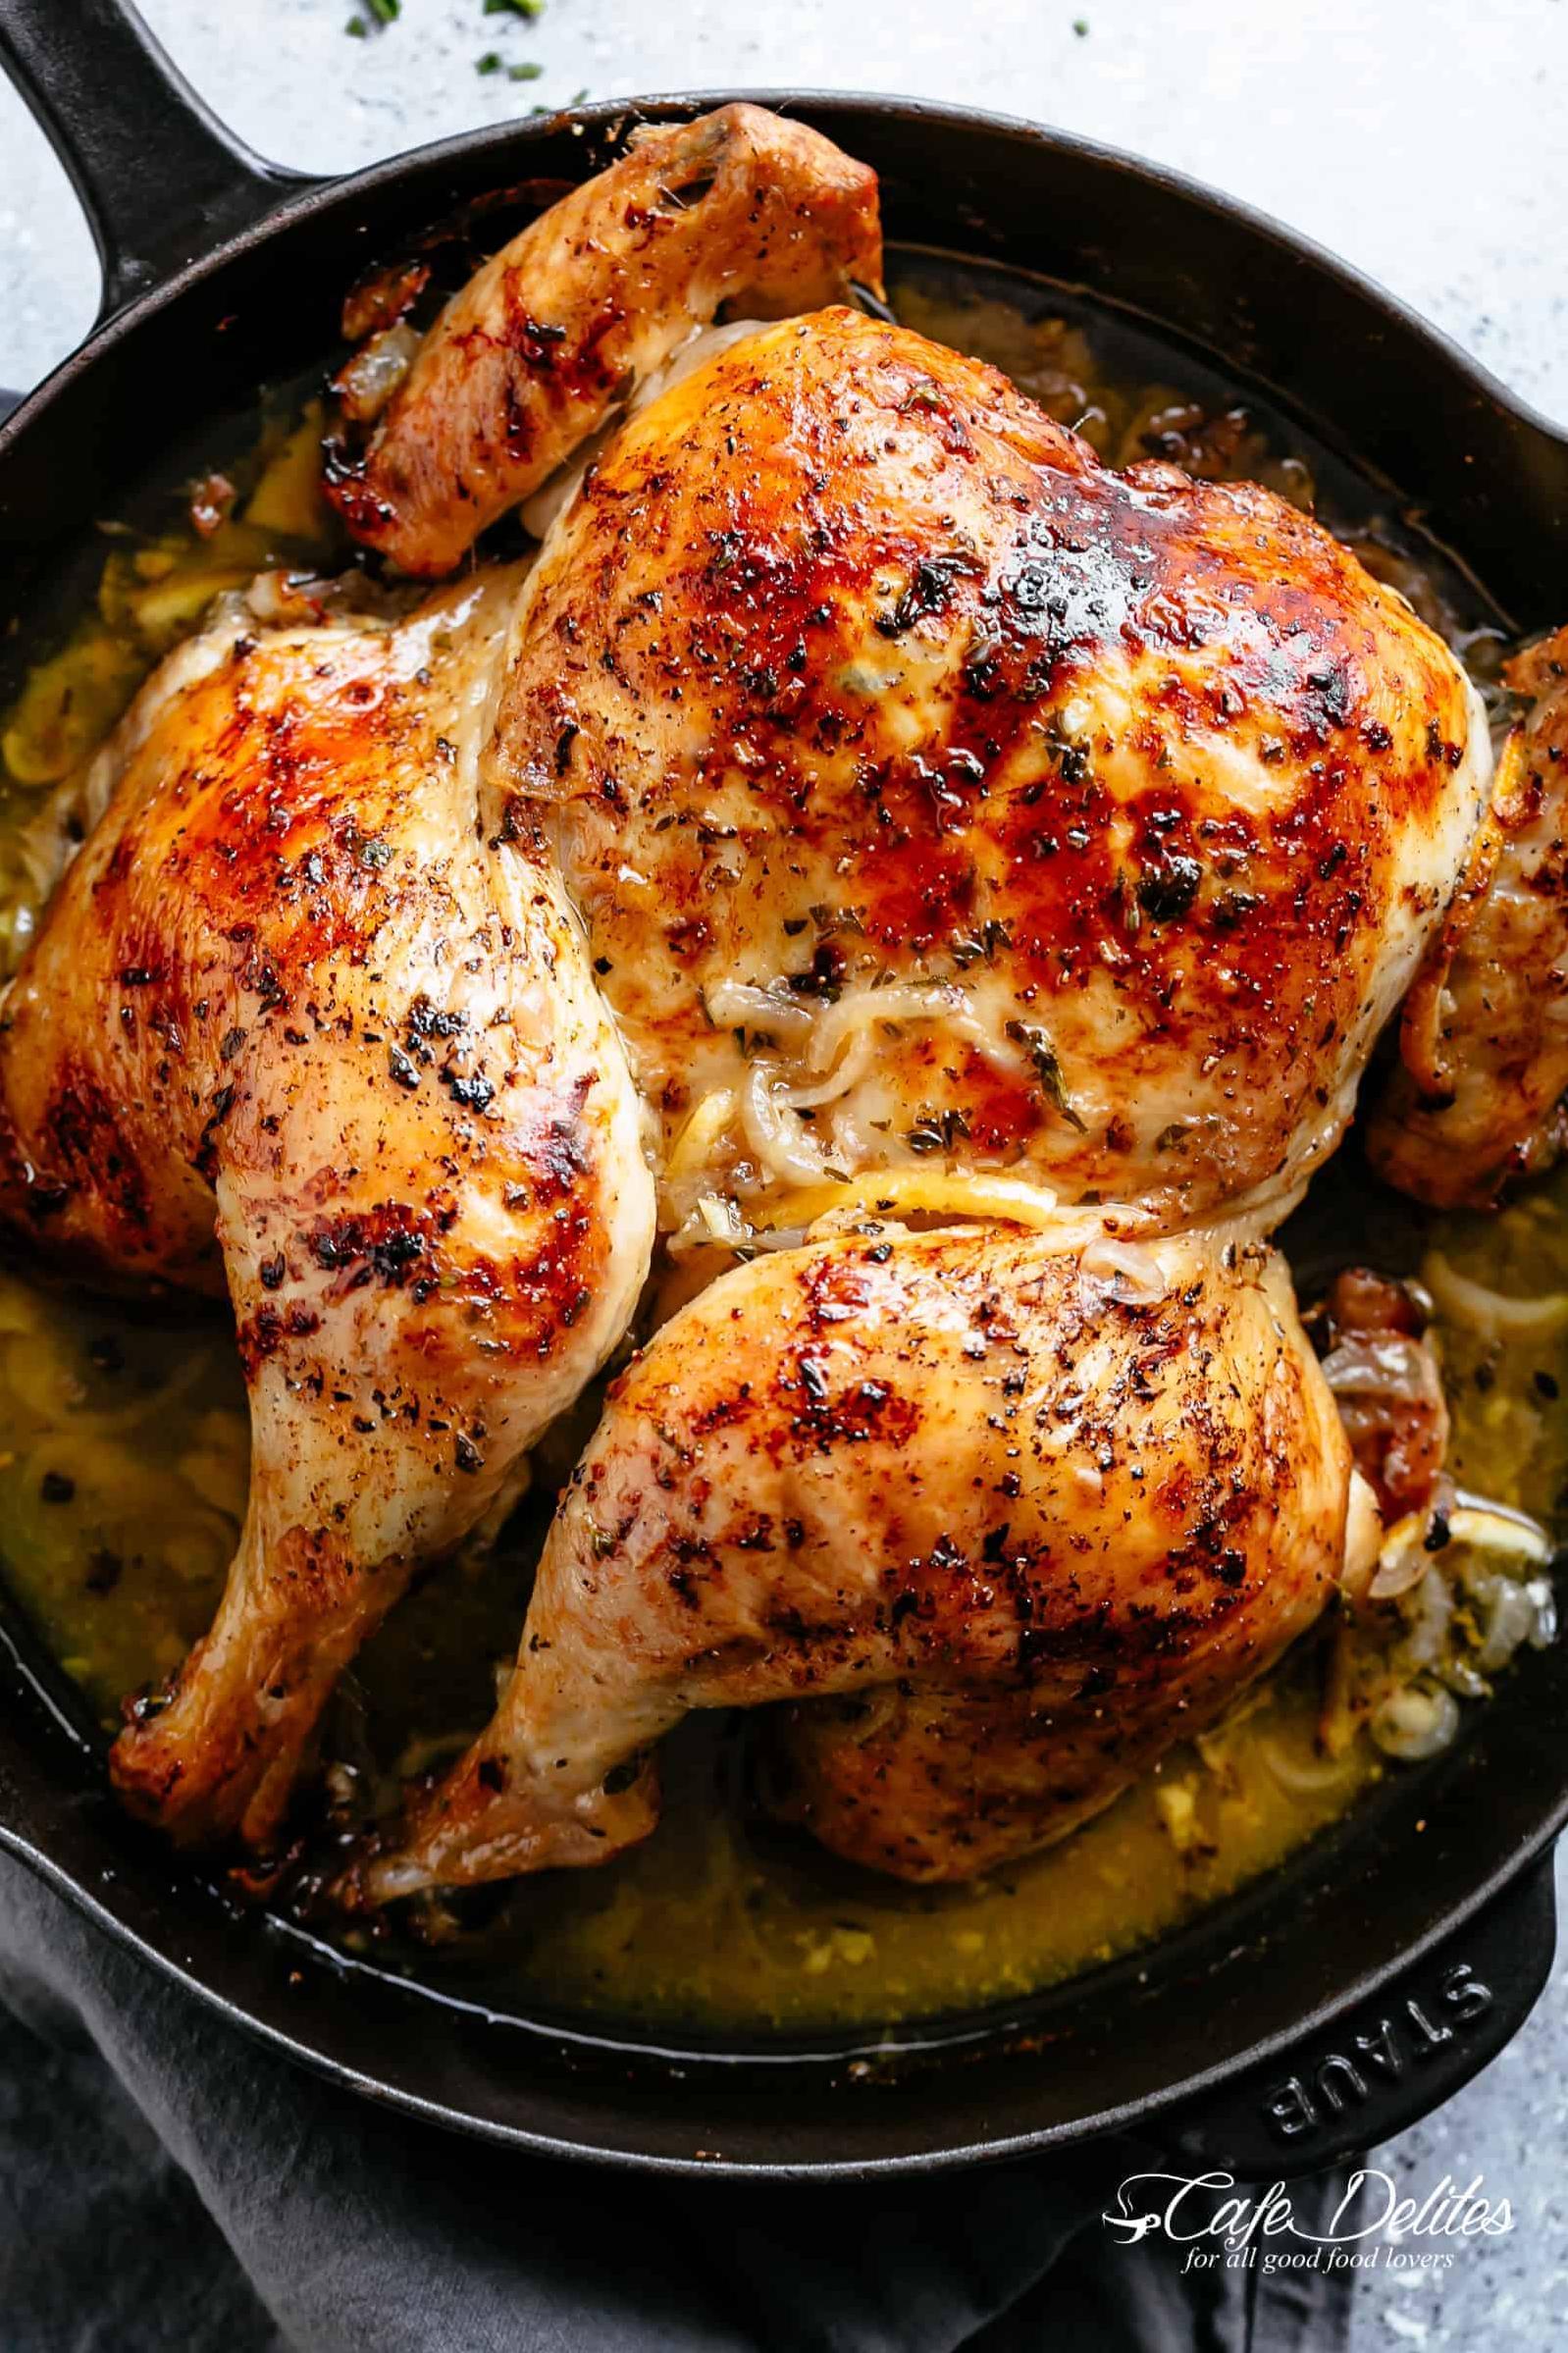  Impress your guests with this delicious and easy pot roast chicken recipe